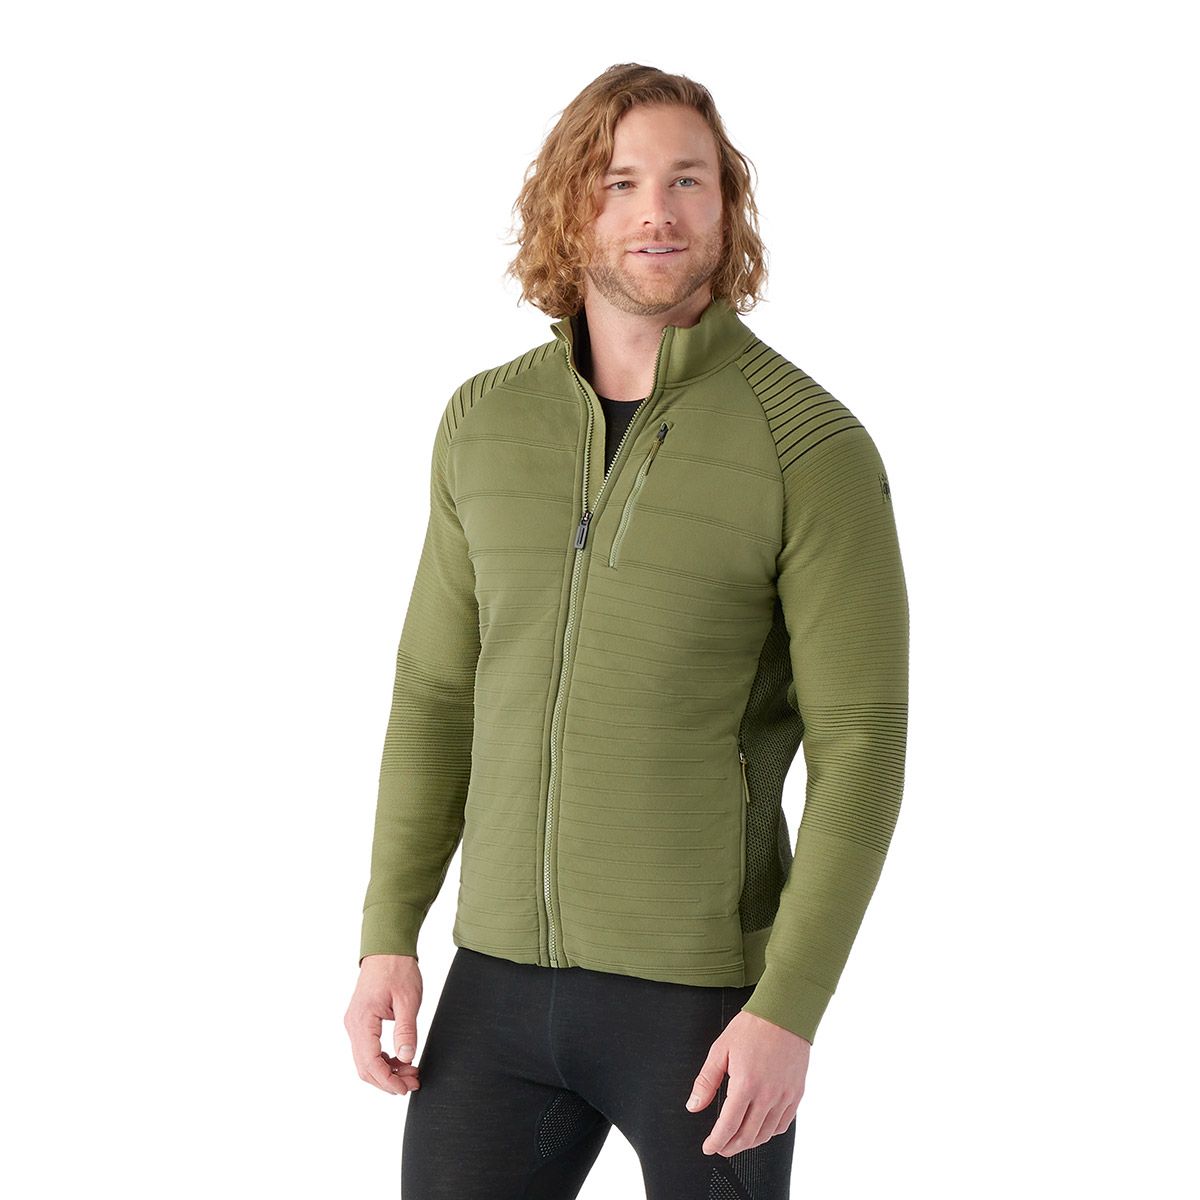 Smartwool Intraknit Merino Insulated Jacket - Mens, FREE SHIPPING in  Canada